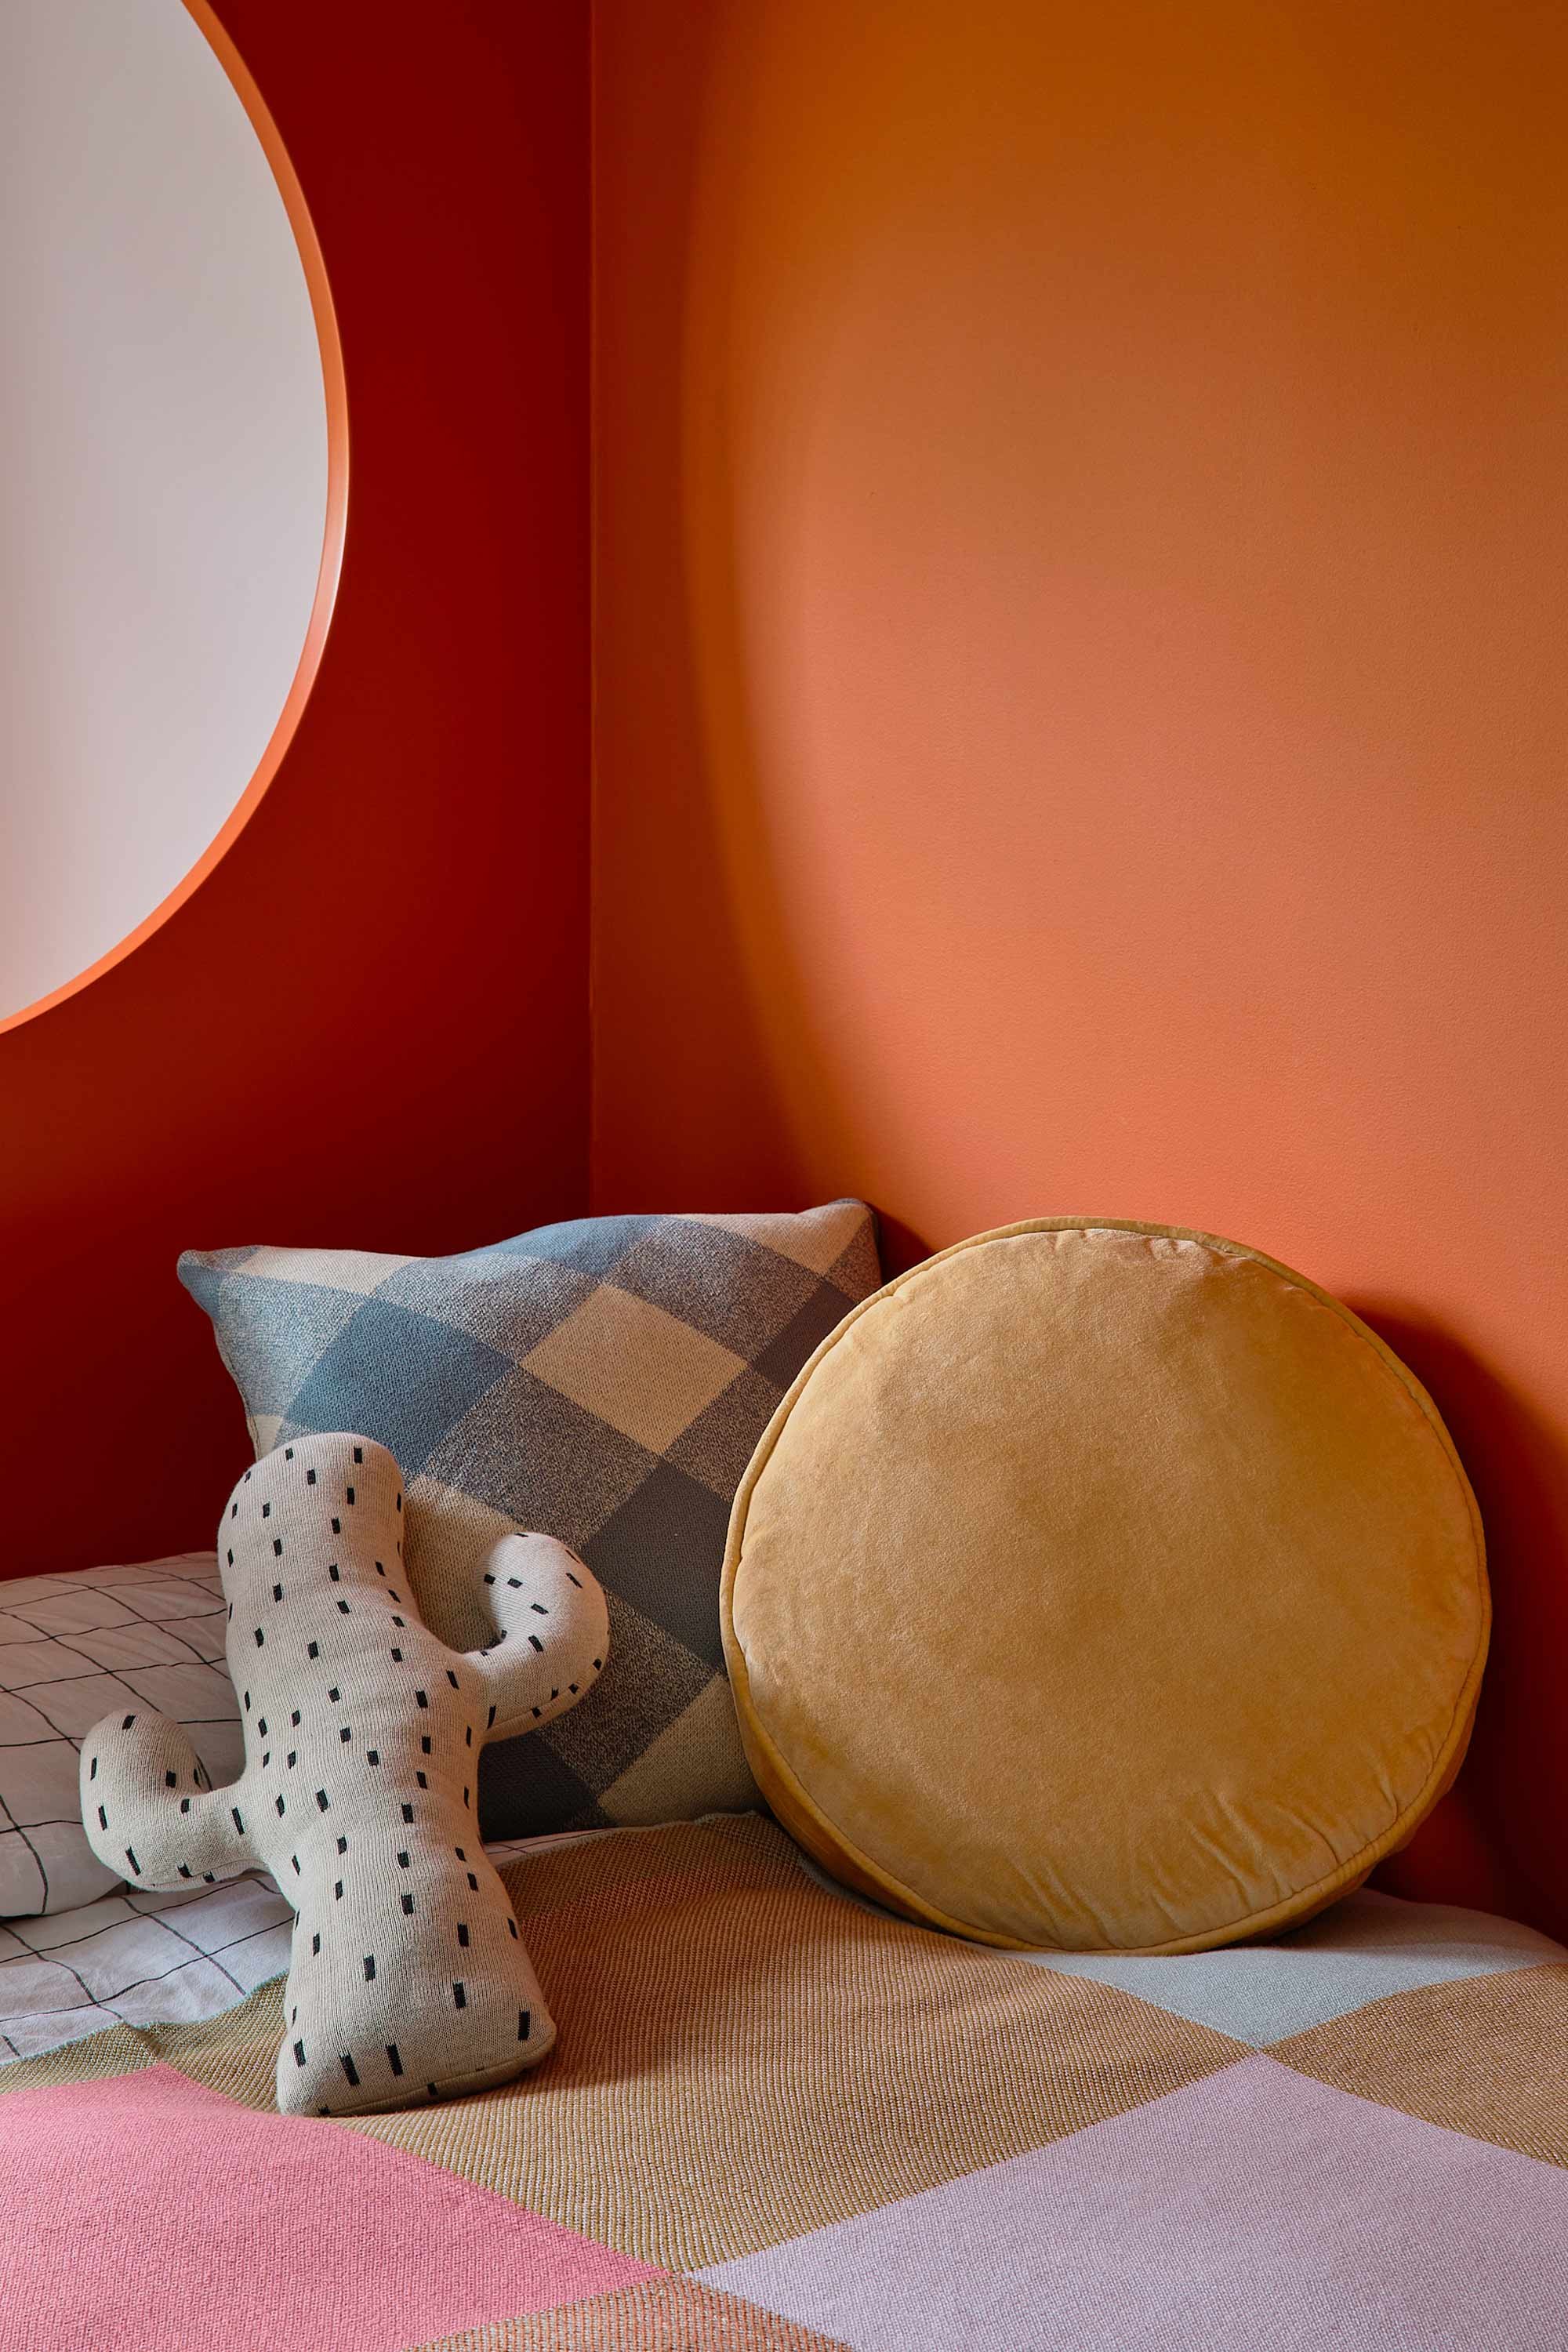 orange-bedroom-wall-close-up-with-cushions-on-bed.jpg